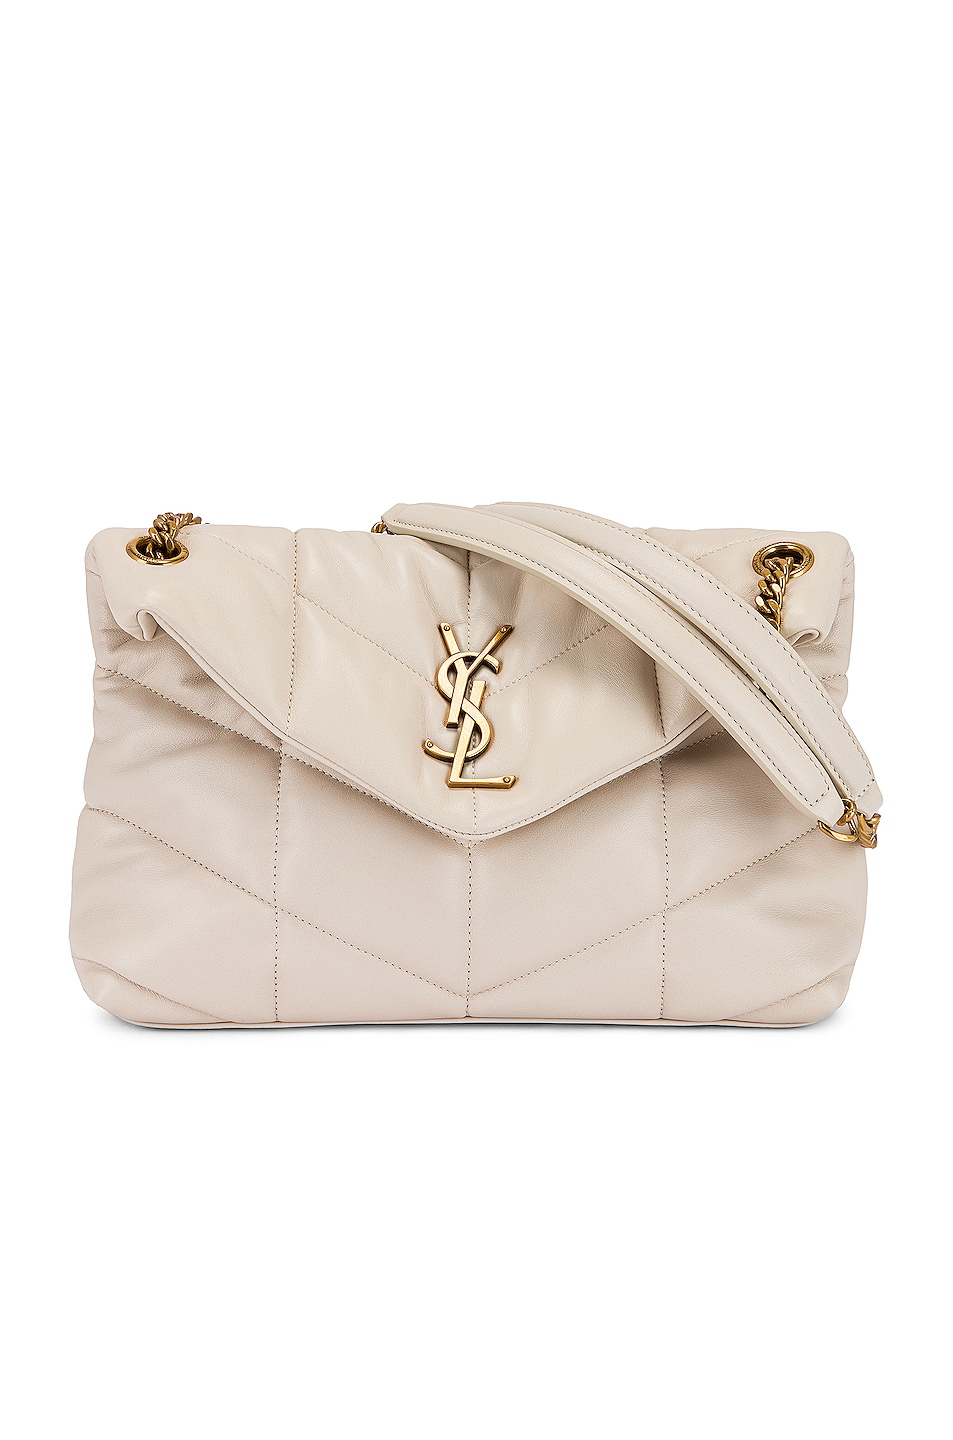 Small LouLou Monogramme Bag in Neutral